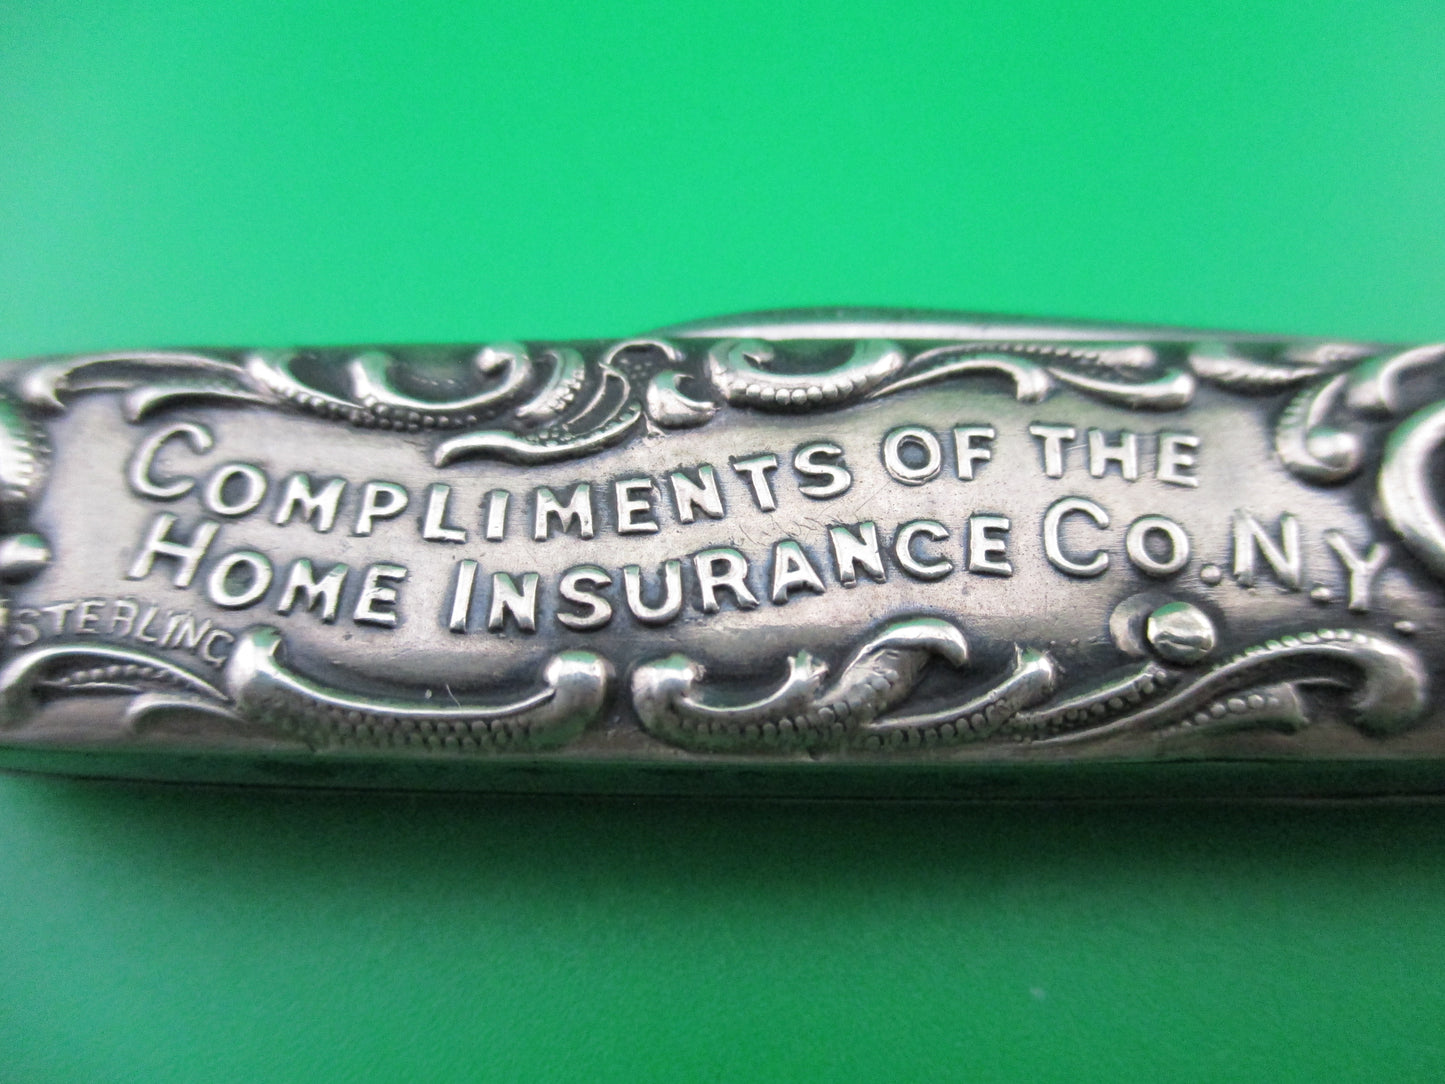 Schrade Cut Co 3 3/8 inch Sterling double scroll